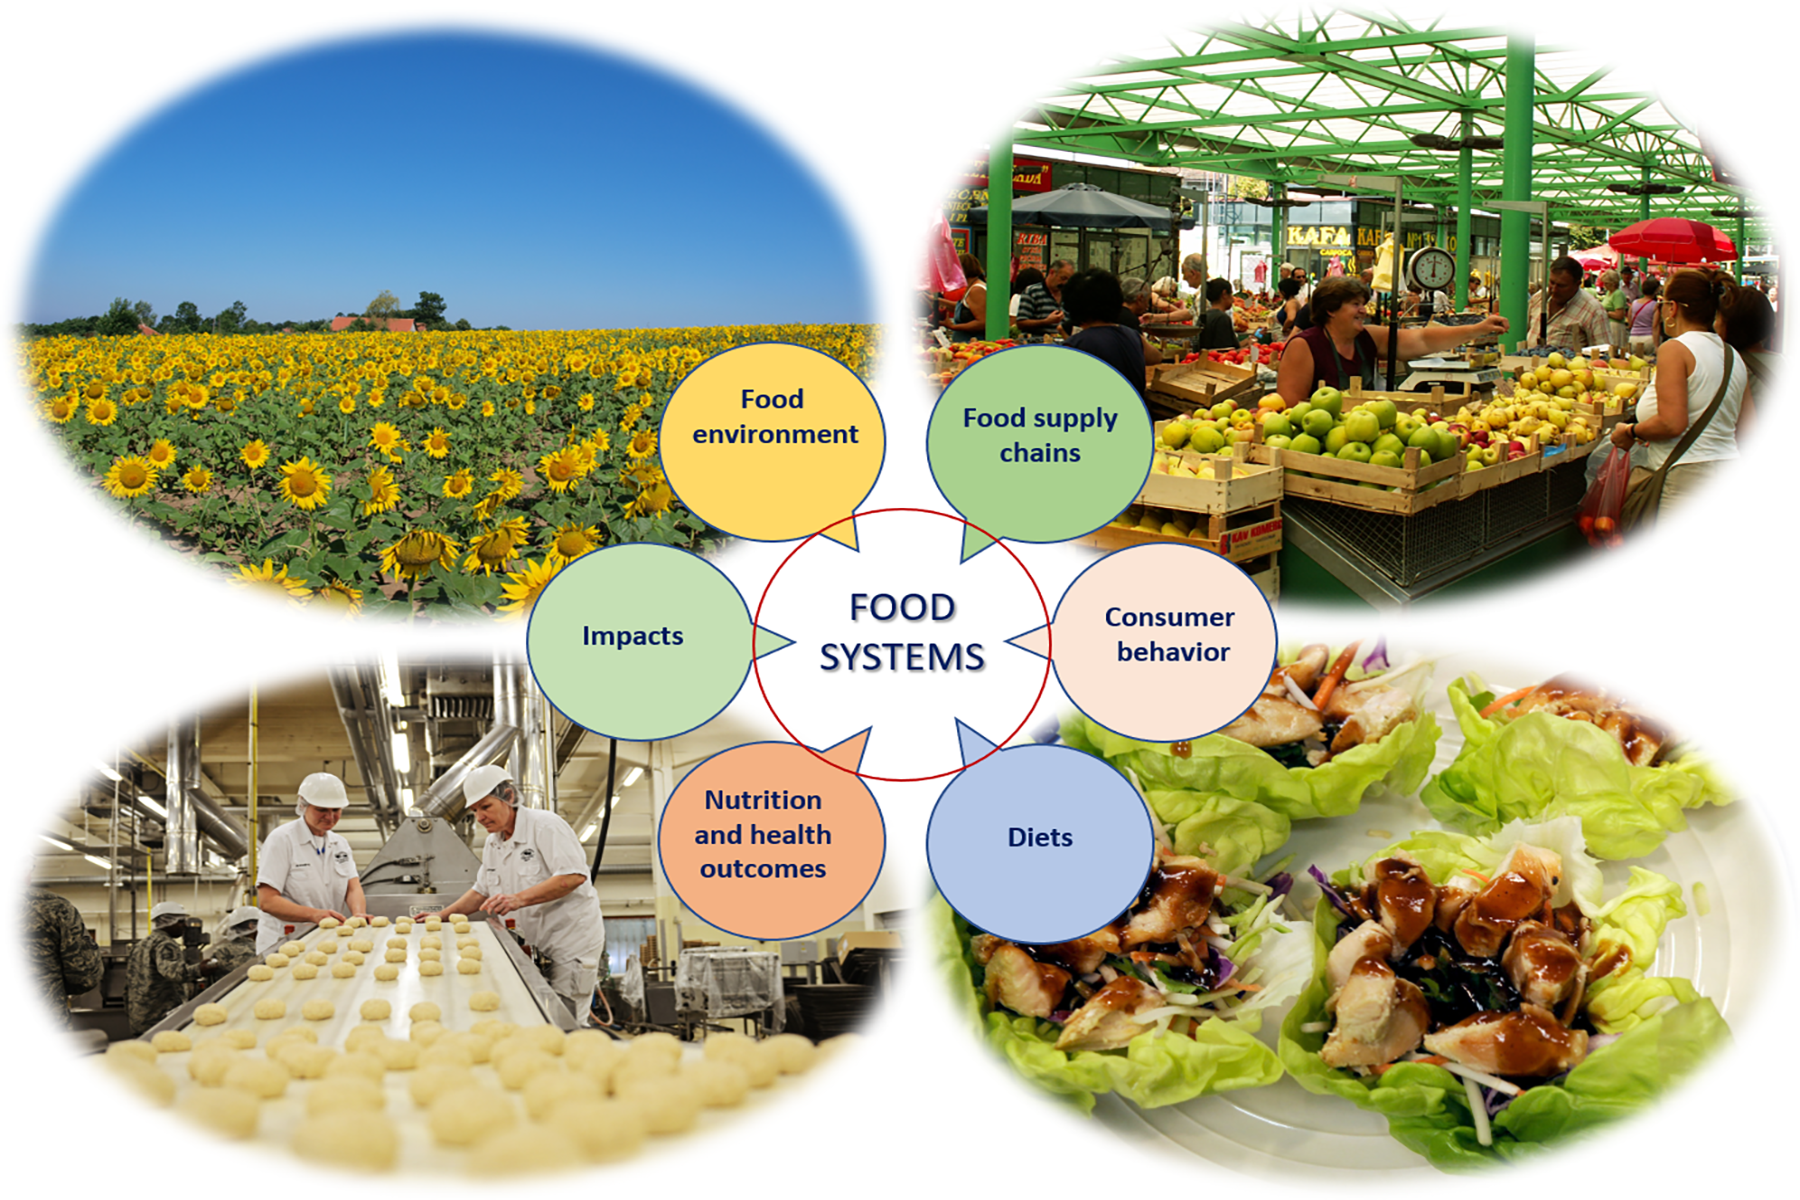 Food systems data for improving diets and nutrition.